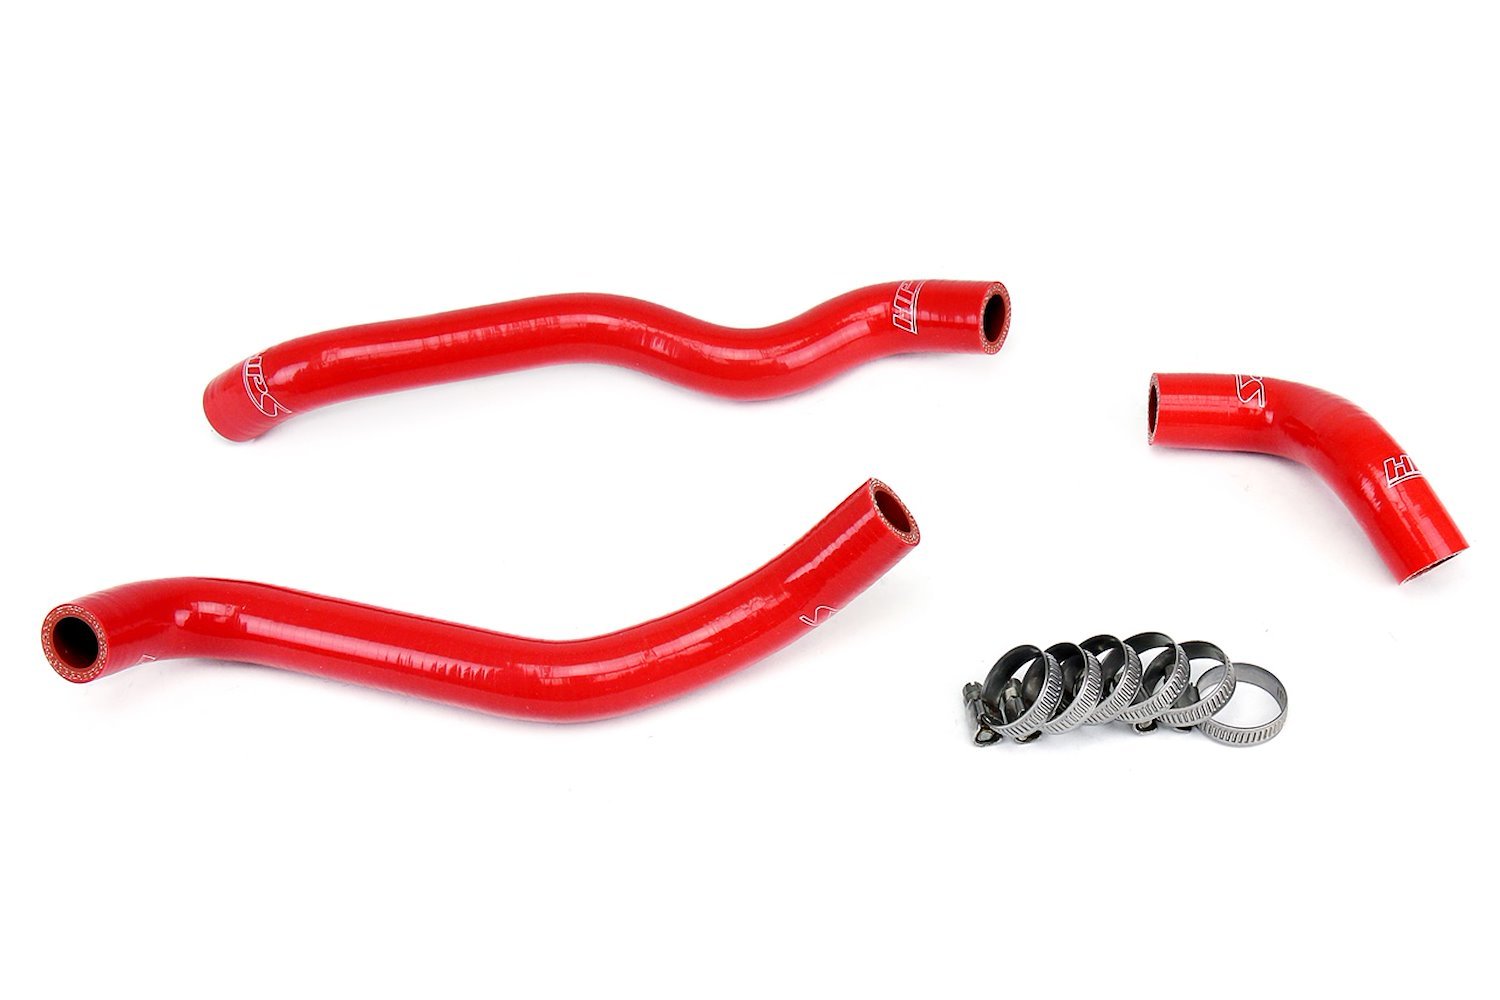 57-1435-RED Heater Hose Kit, High-Temp 3-Ply Reinforced Silicone, Replace OEM Rubber Heater Coolant Hoses